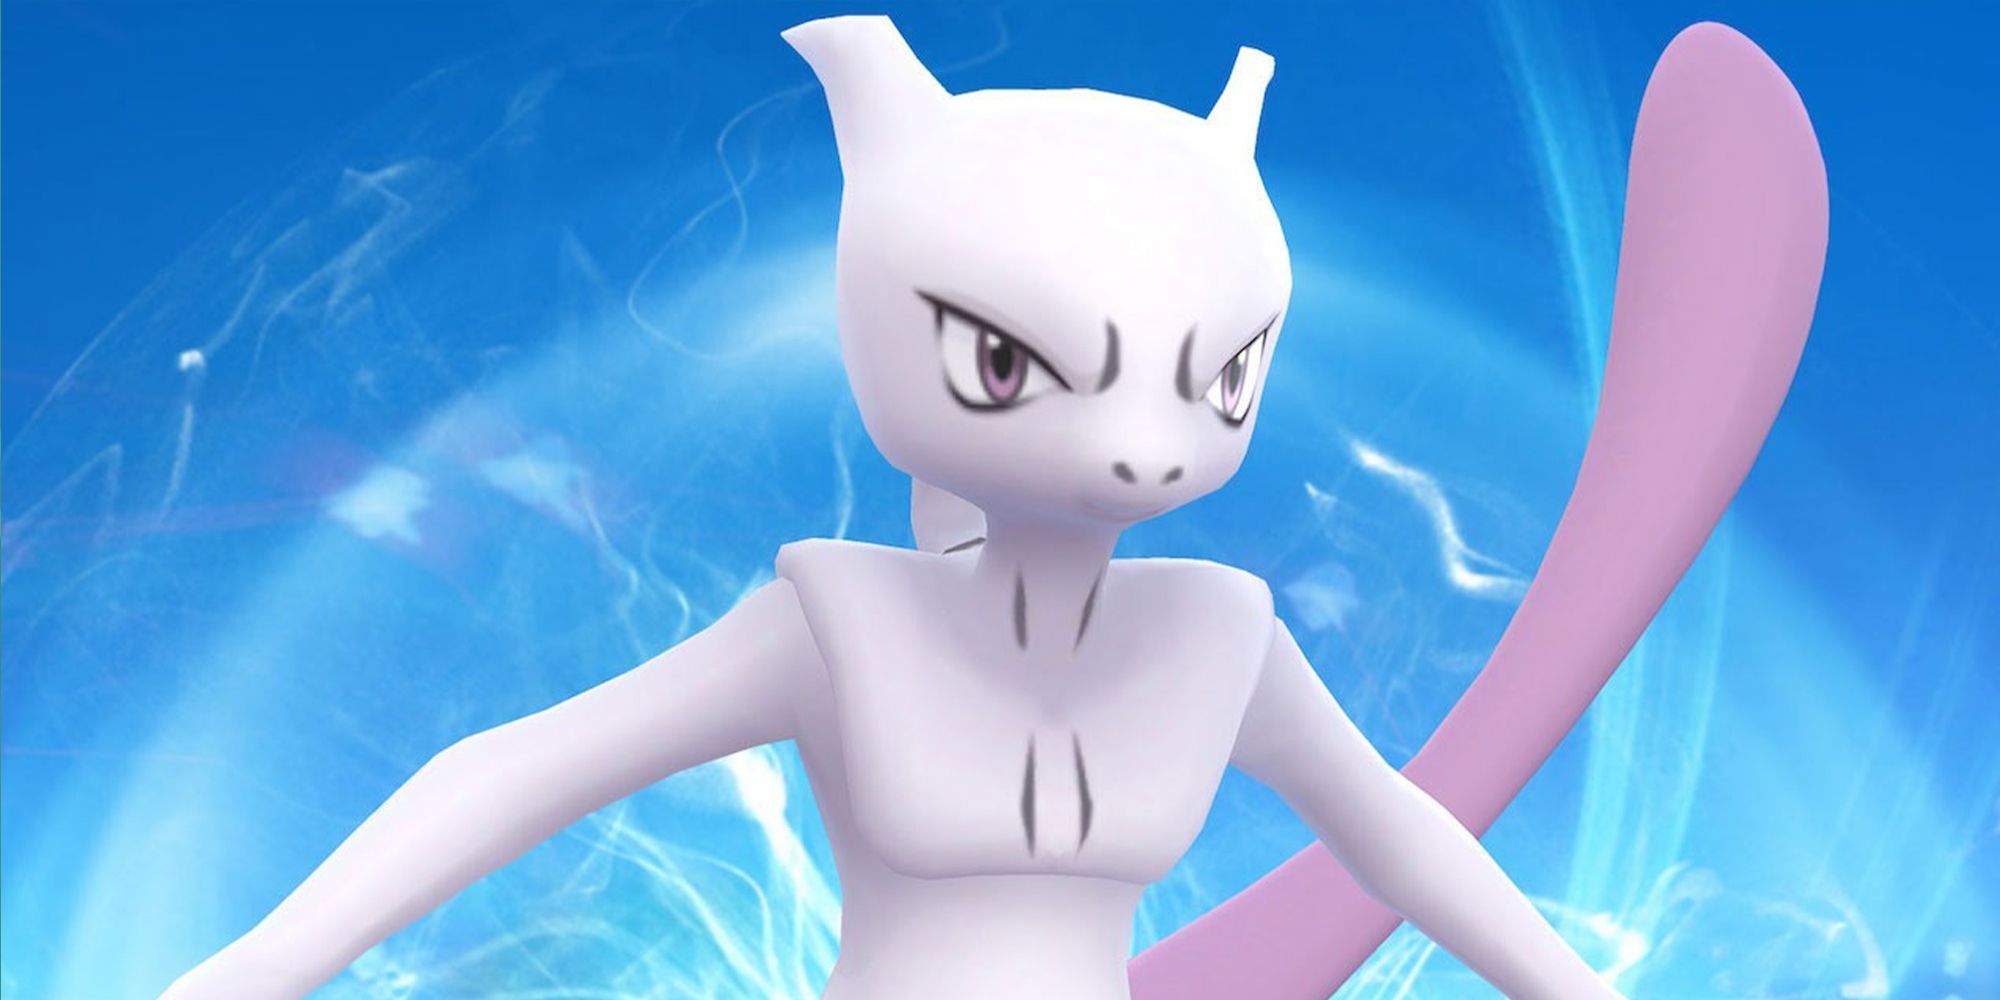 Pokémon GO: How to Defeat Mewtwo (Movesets, Weaknesses, & Counters)